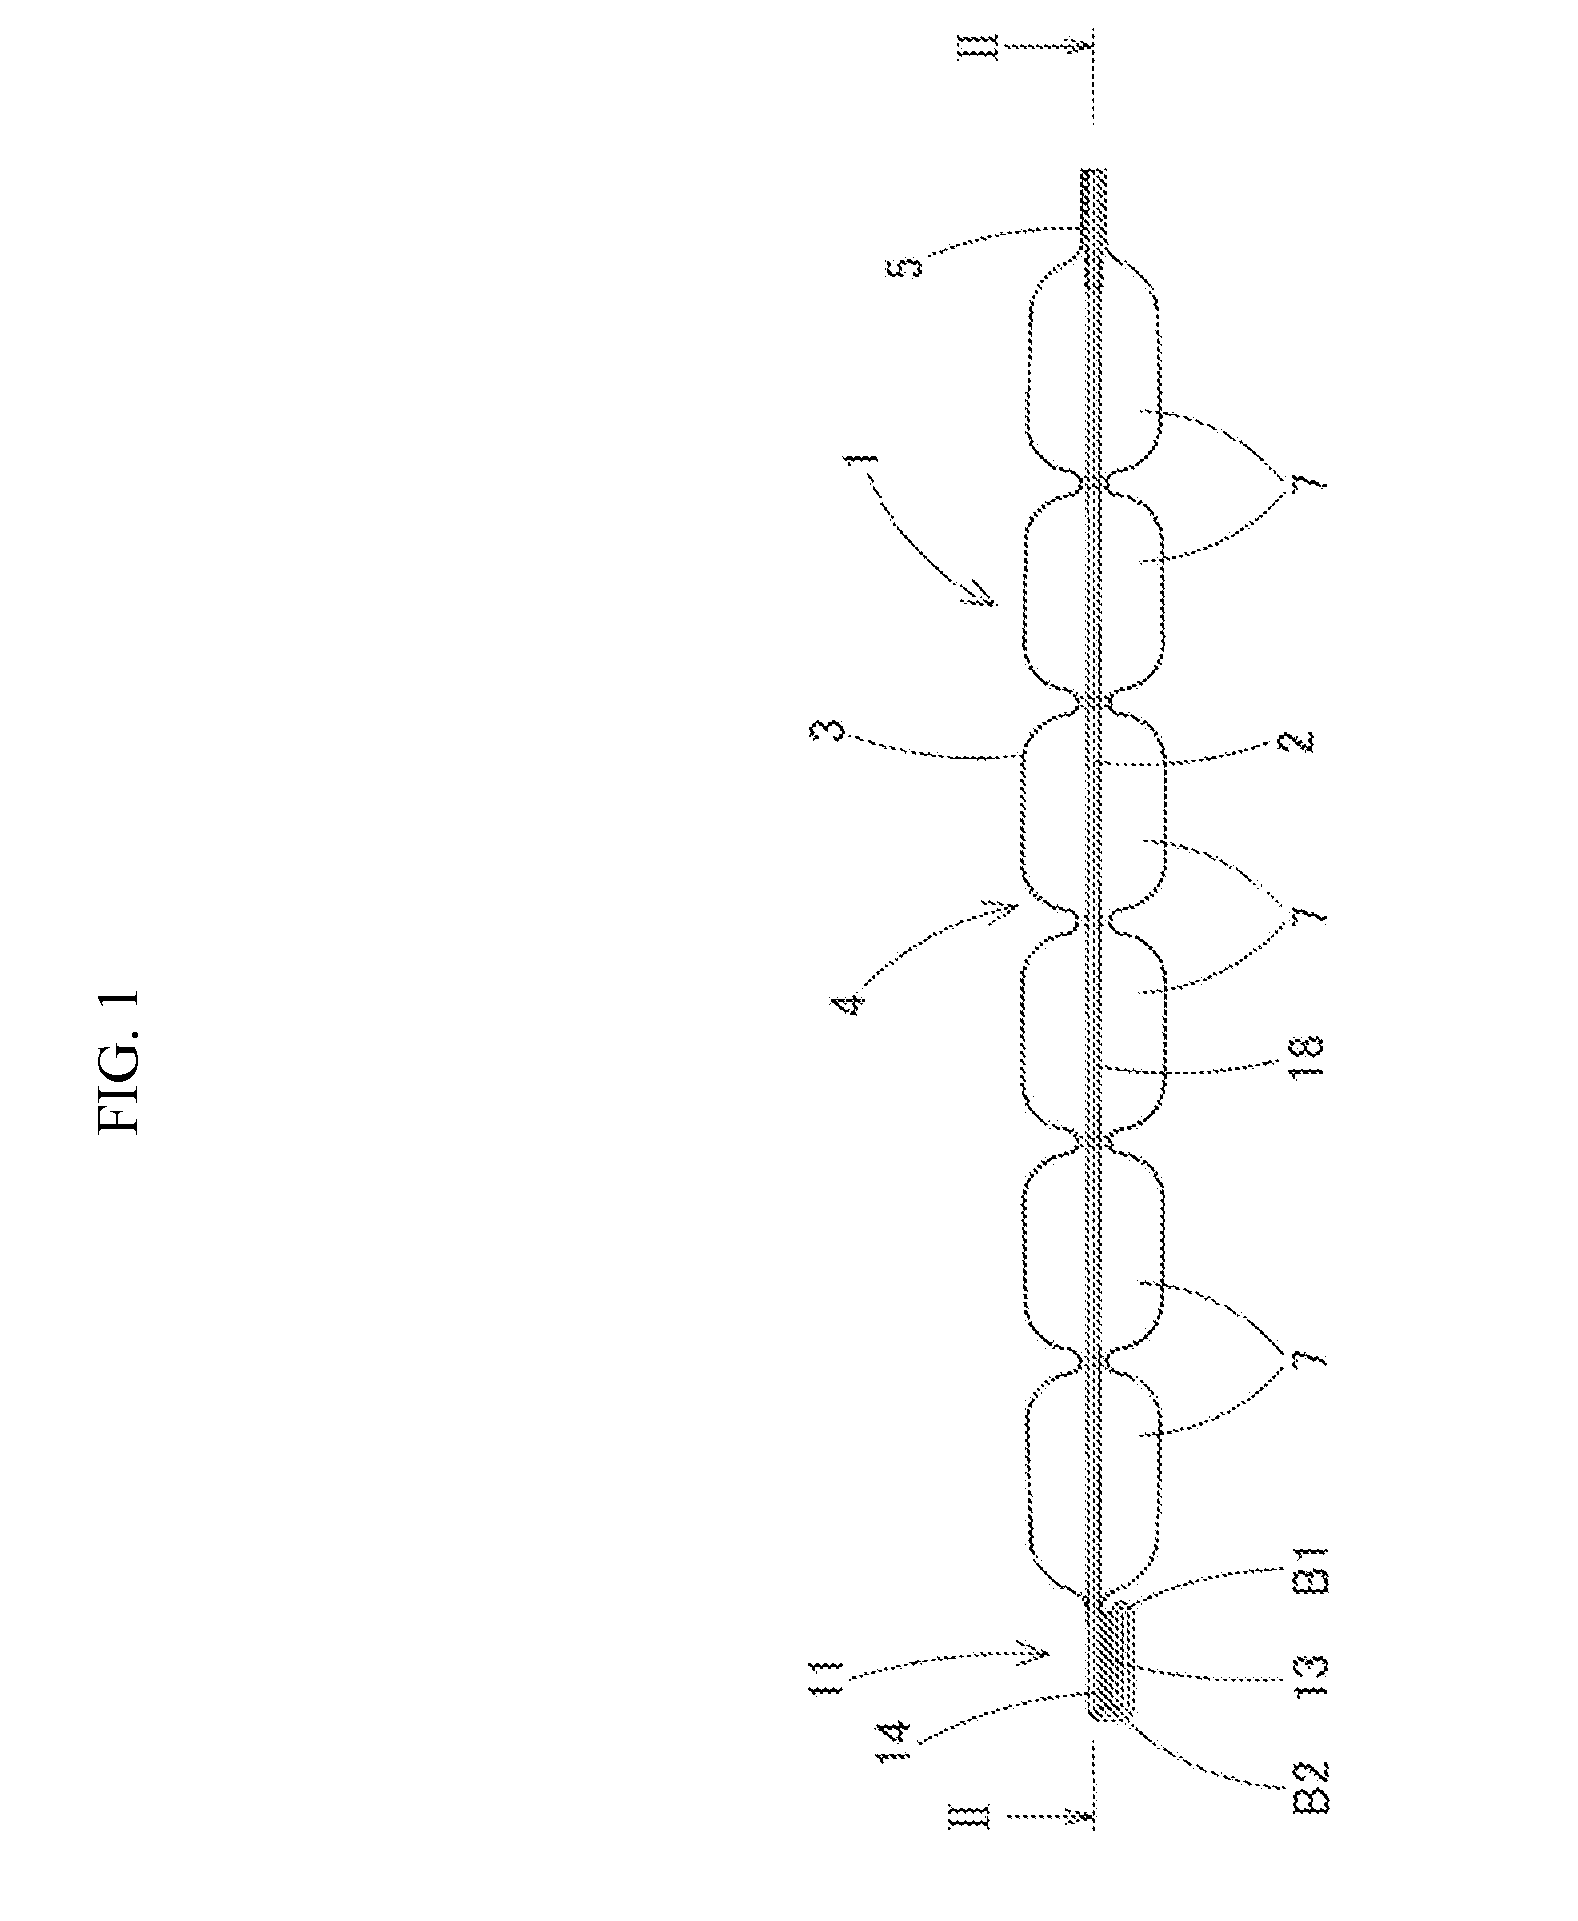 Exhaust valve apparatus and gas filled cushion